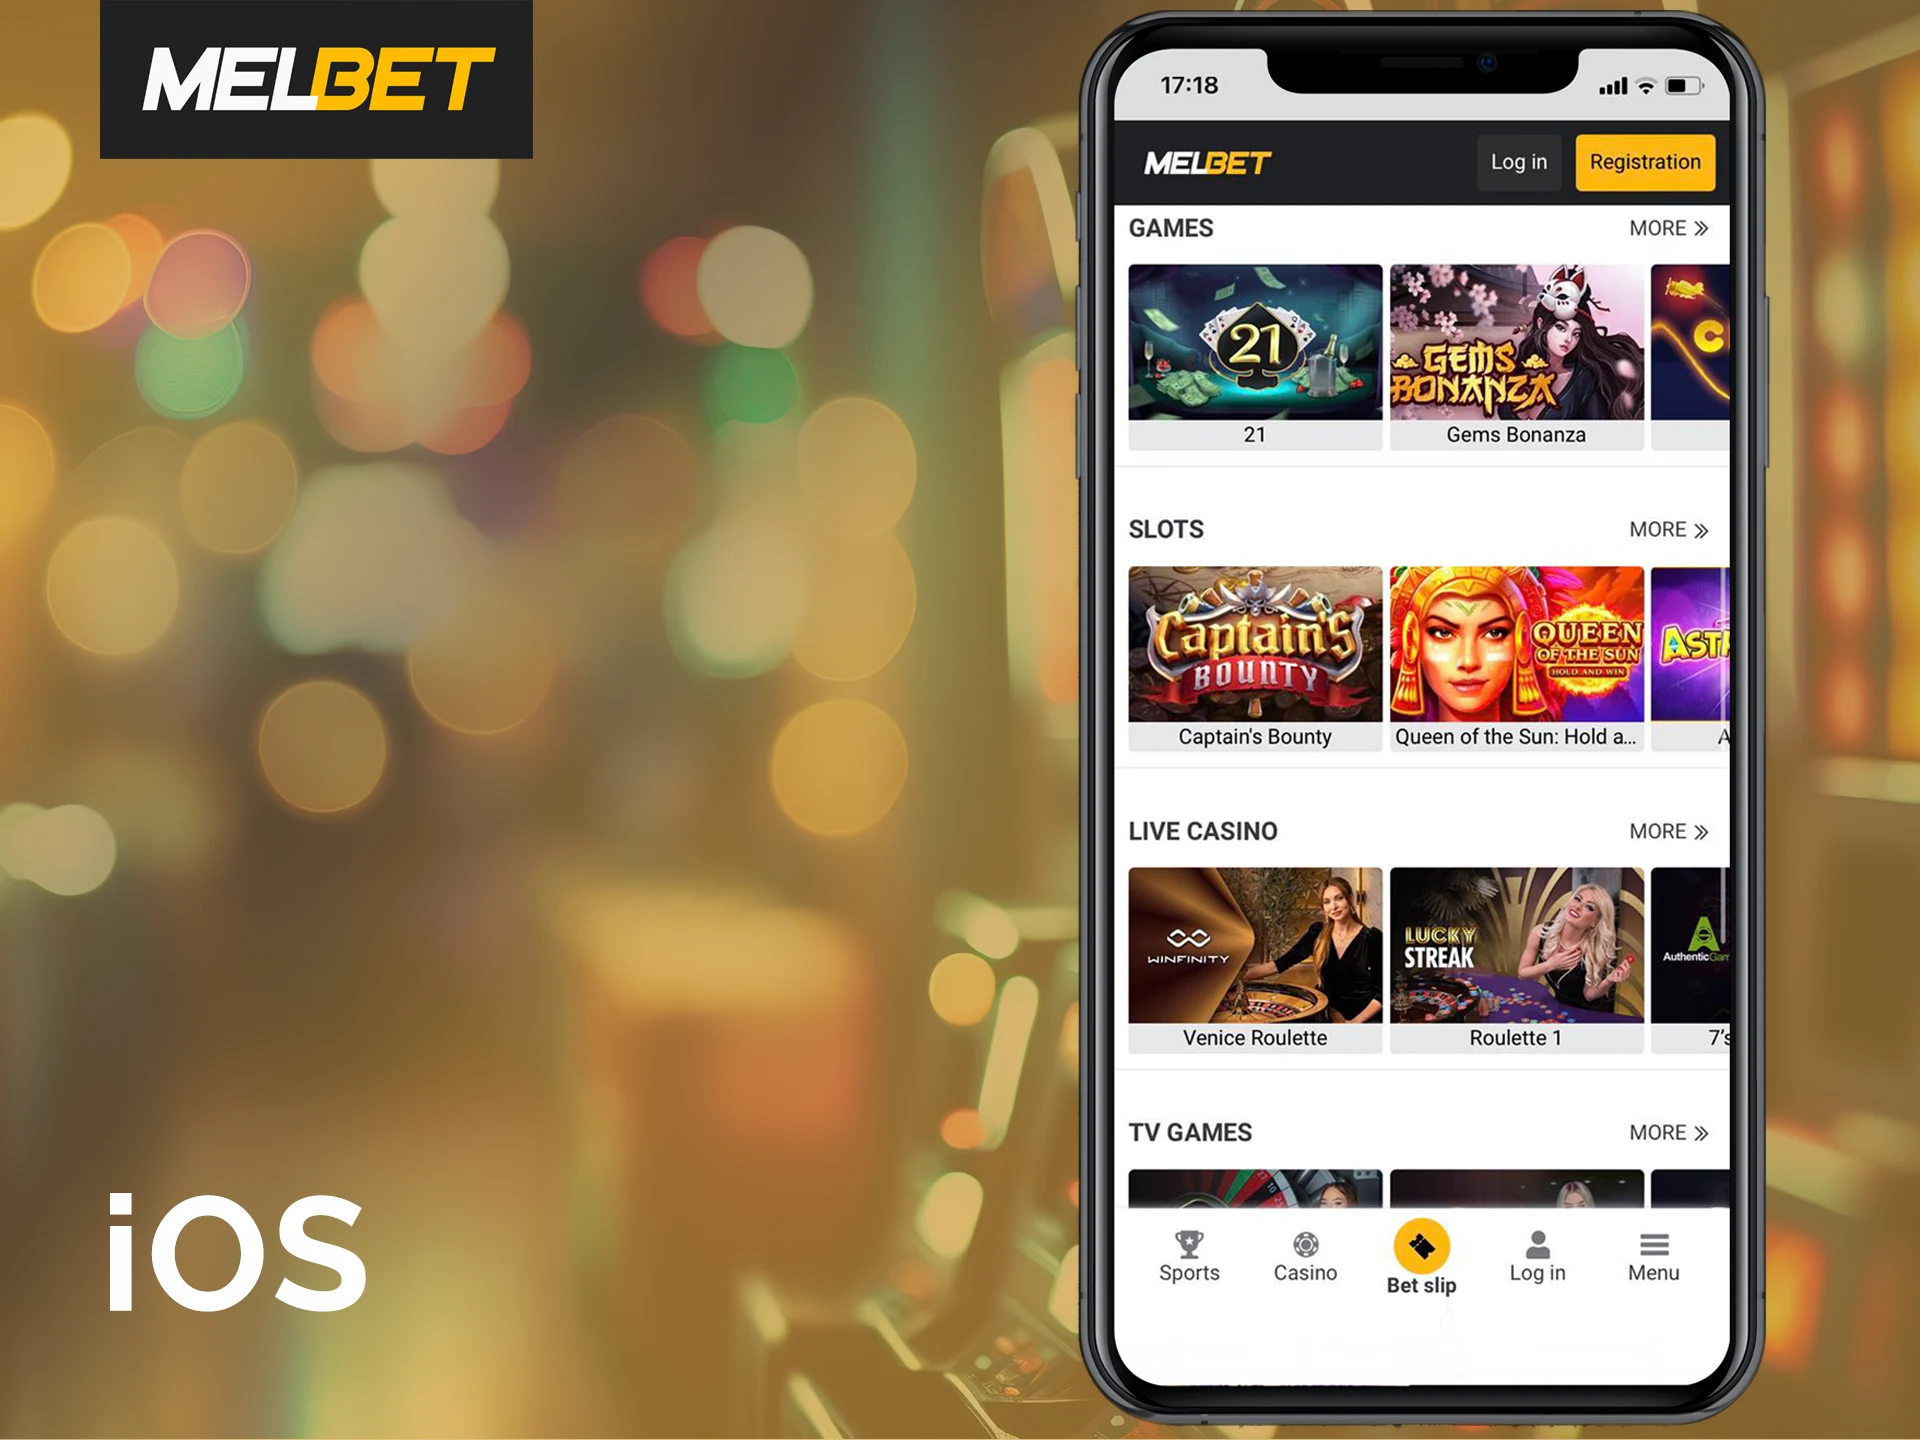 Install the iOS version of the Melbet mobile app.